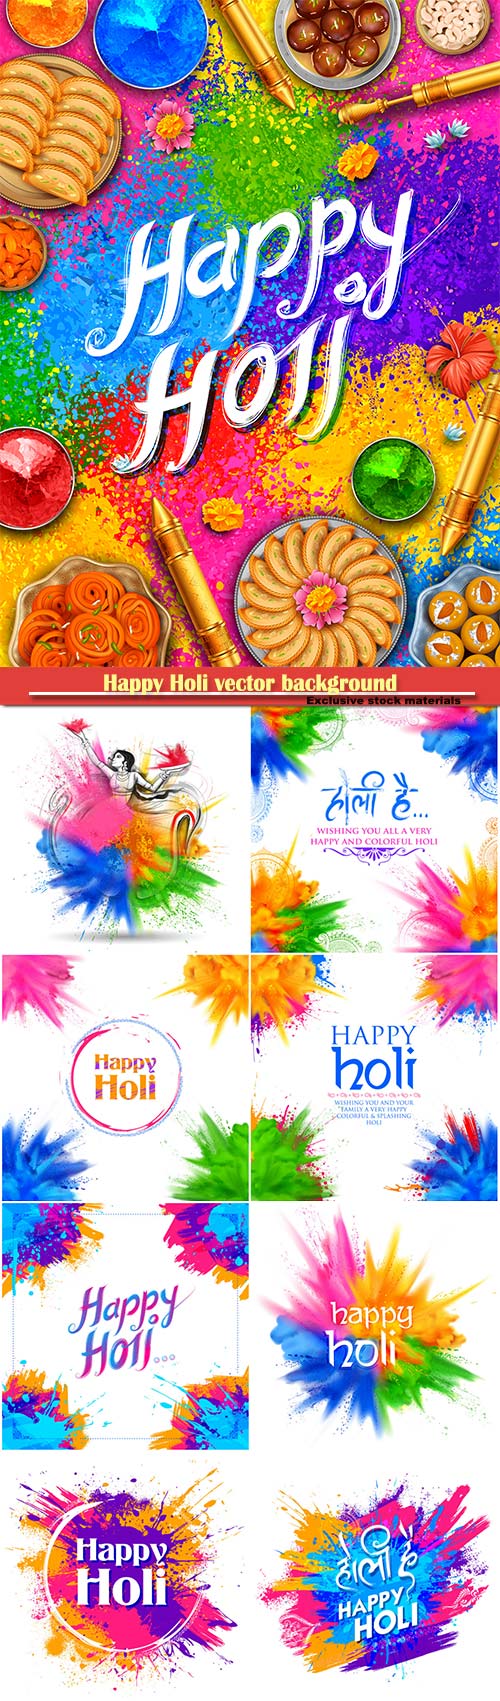 Happy Holi vector background abstract colorful illustration